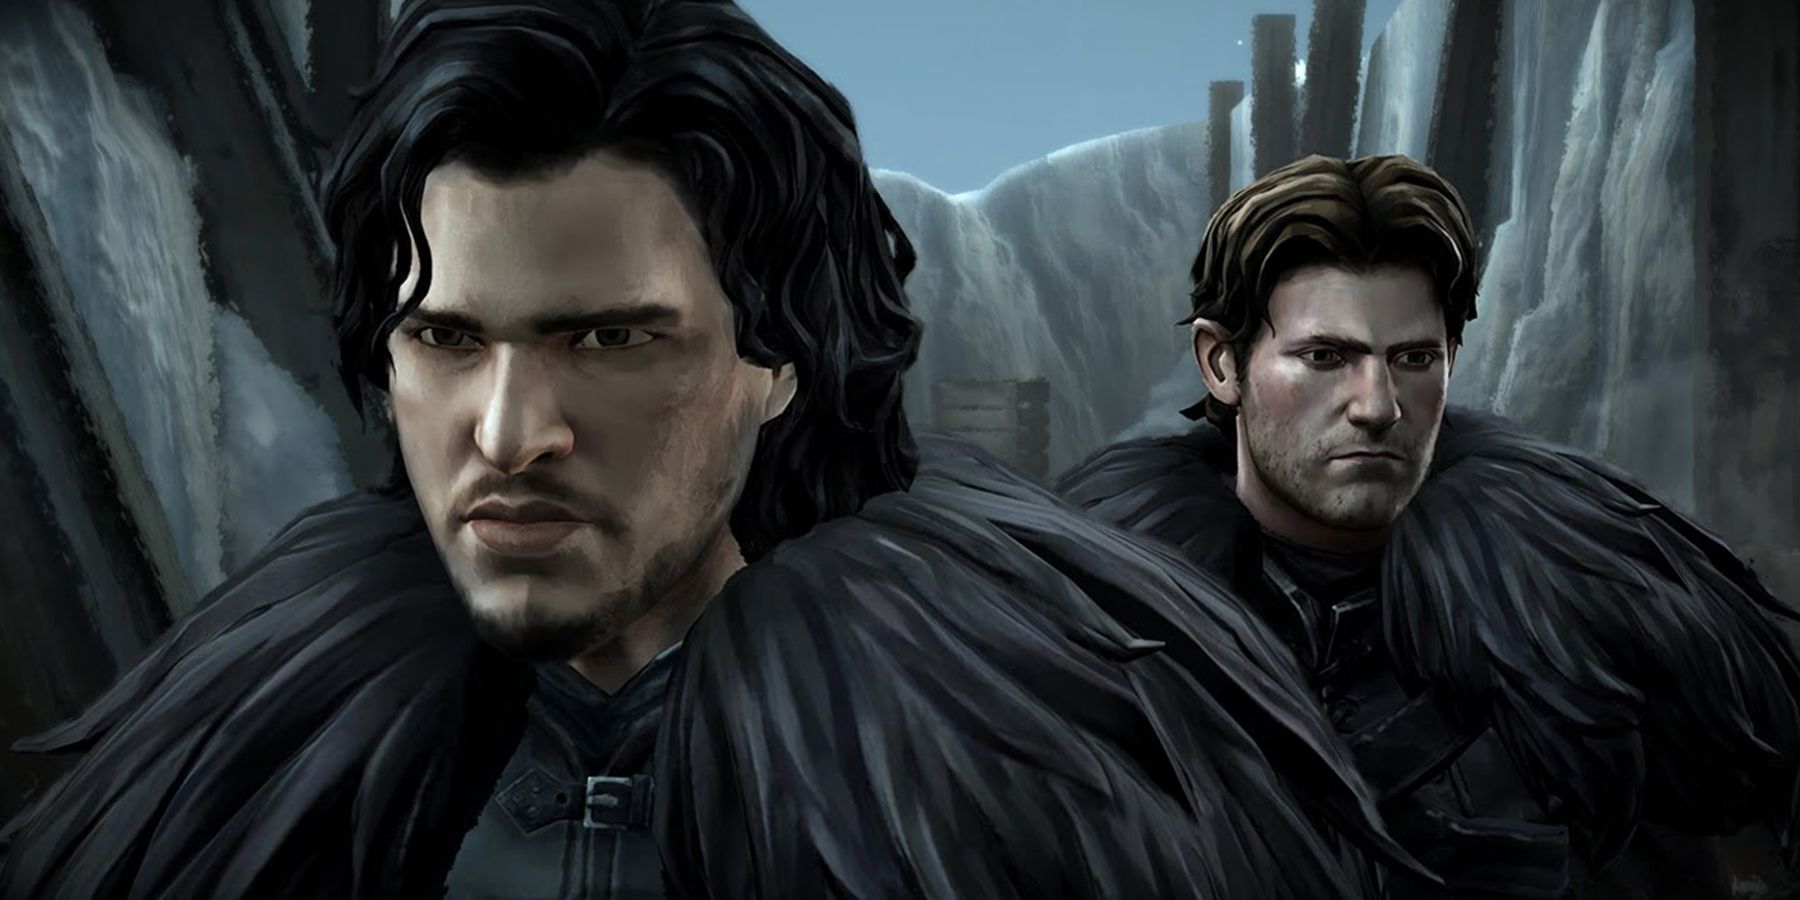 Gared and Jon Snow in Game Of Thrones: A Telltale Games Series.